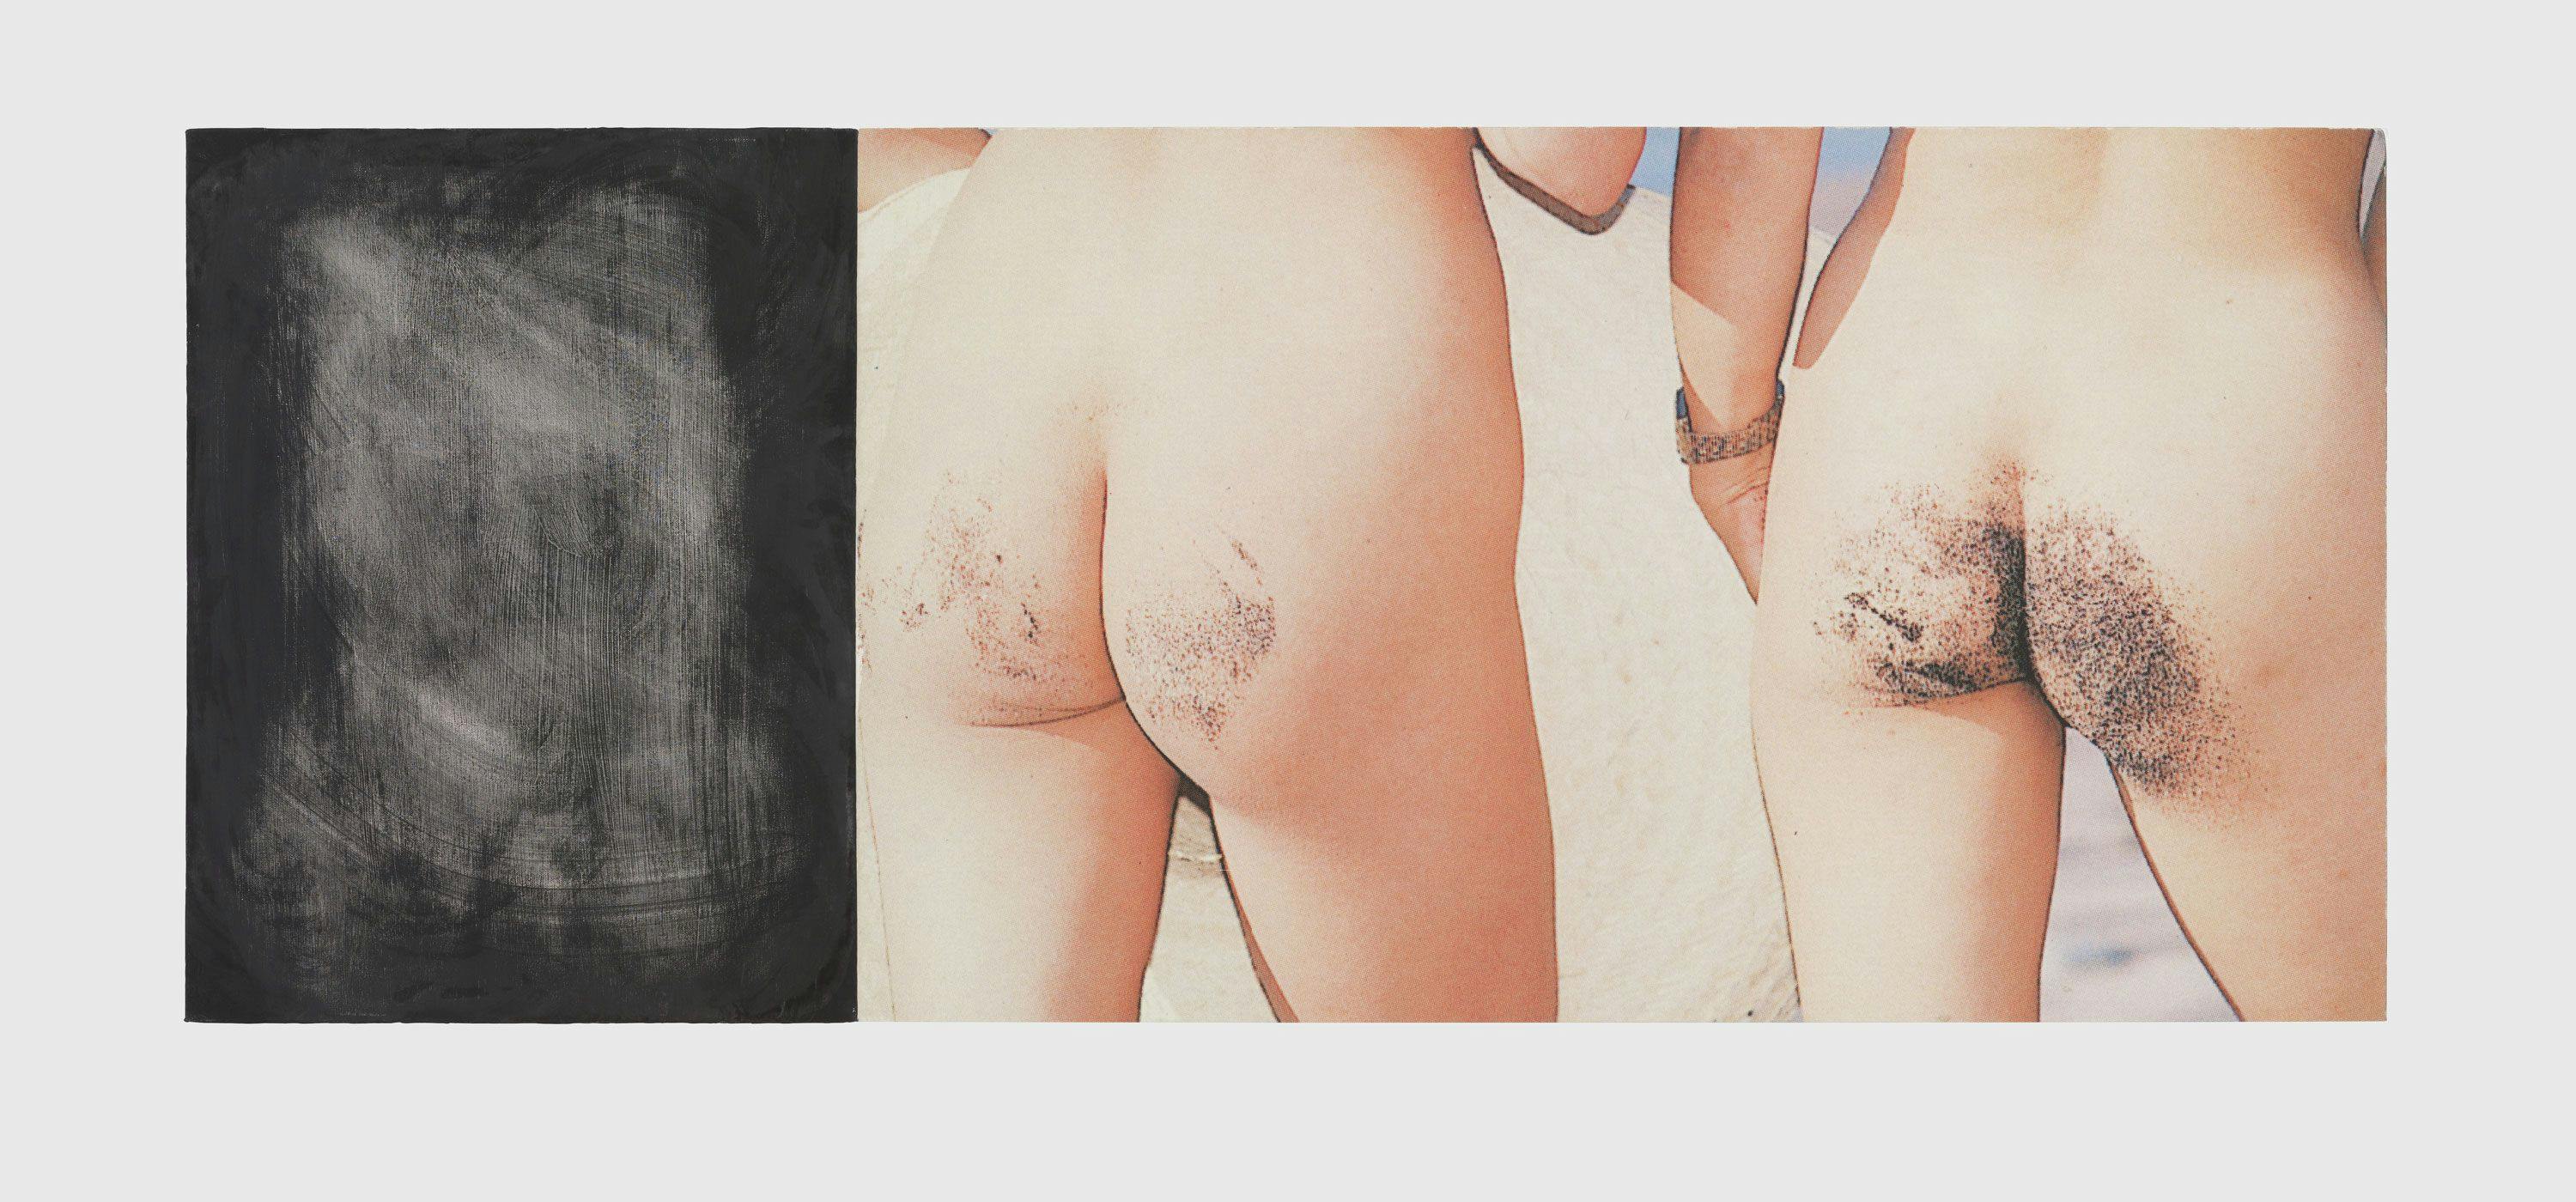 A two part inkjet print on canvas, alkyd on canvas artwork by Nate Lowman, titled Beach Bums, dated 2009.